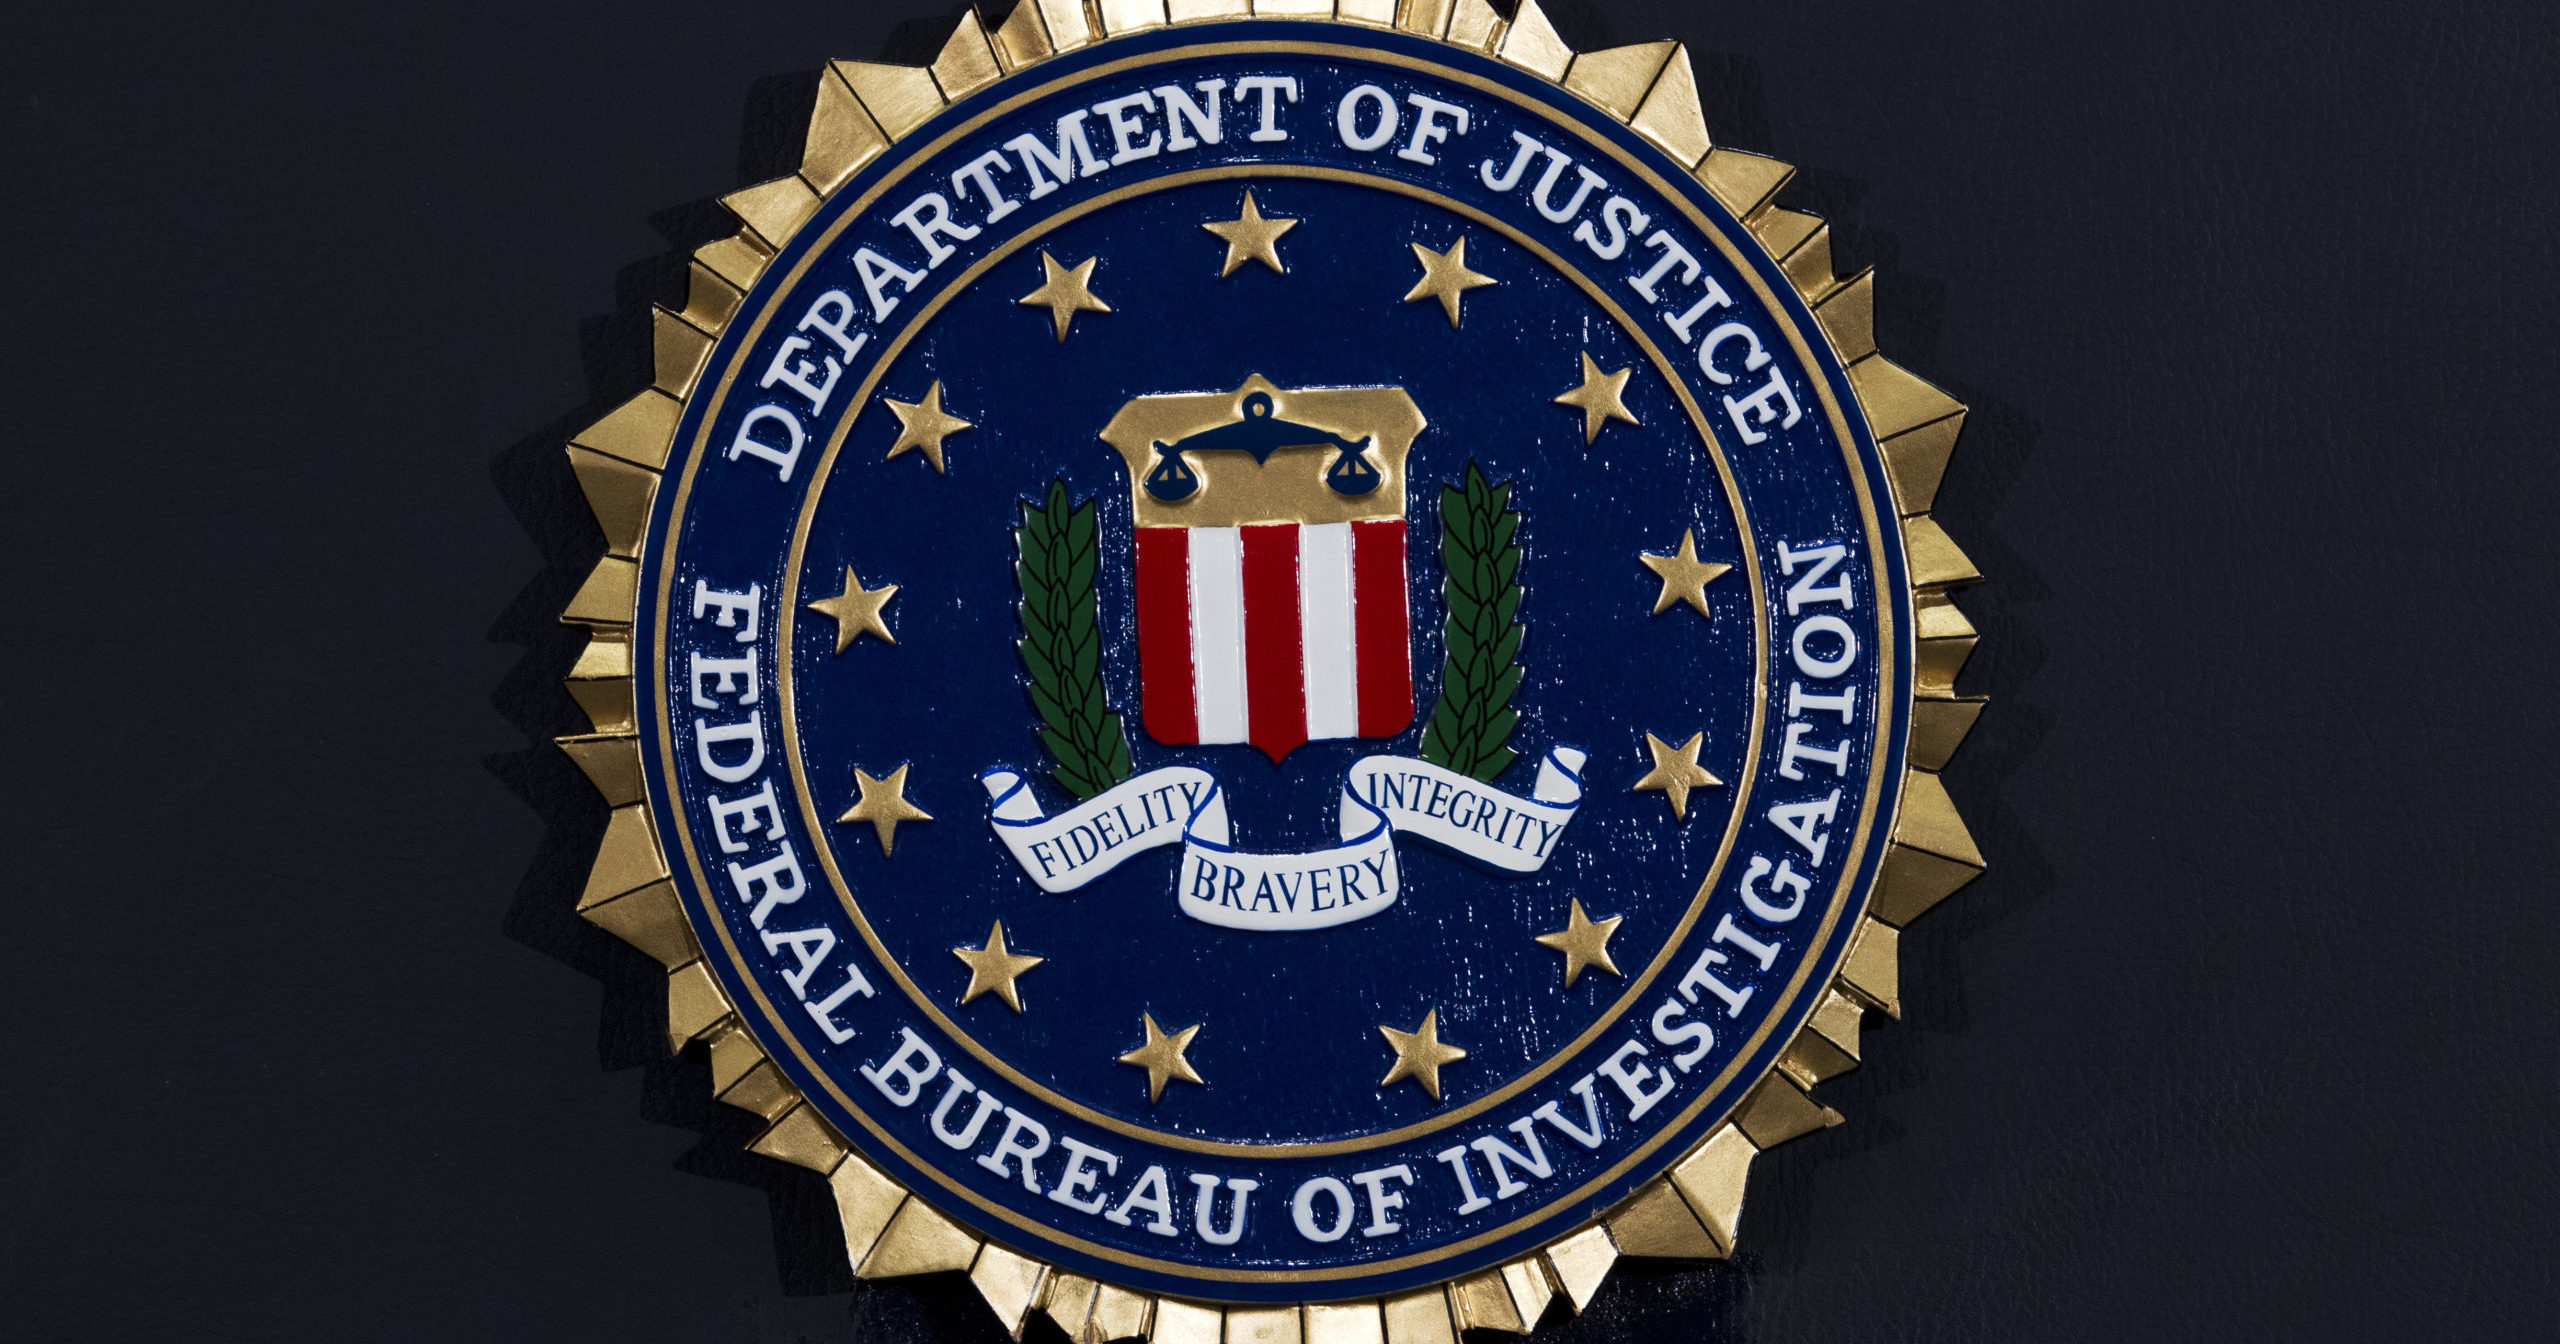 This June 14, 2018, file photo shows the FBI seal at a news conference at FBI headquarters in Washington.